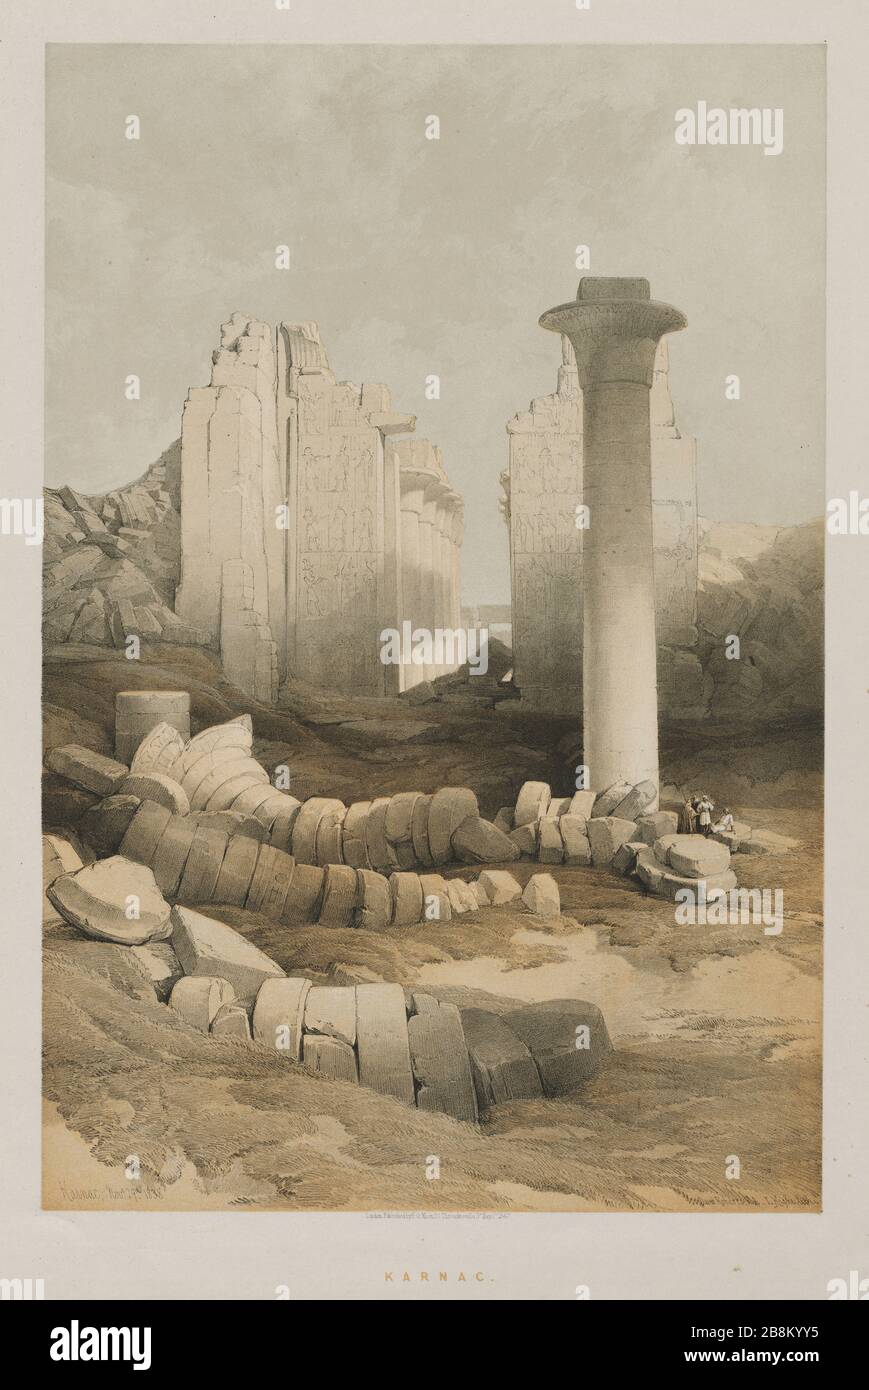 Karnak from Egypt and Nubia, Volume II: Karnak, 1848. Louis Haghe (British, 1806-1885), F.G.Moon, 20 Threadneedle Street, London, after David Roberts (British, 1796-1864). Color lithograph; sheet: 60.4 x 43.6 cm (23 3/4 x 17 3/16 in.); image: 48.8 x 32.7 cm (19 3/16 x 12 7/8 in.) Stock Photo